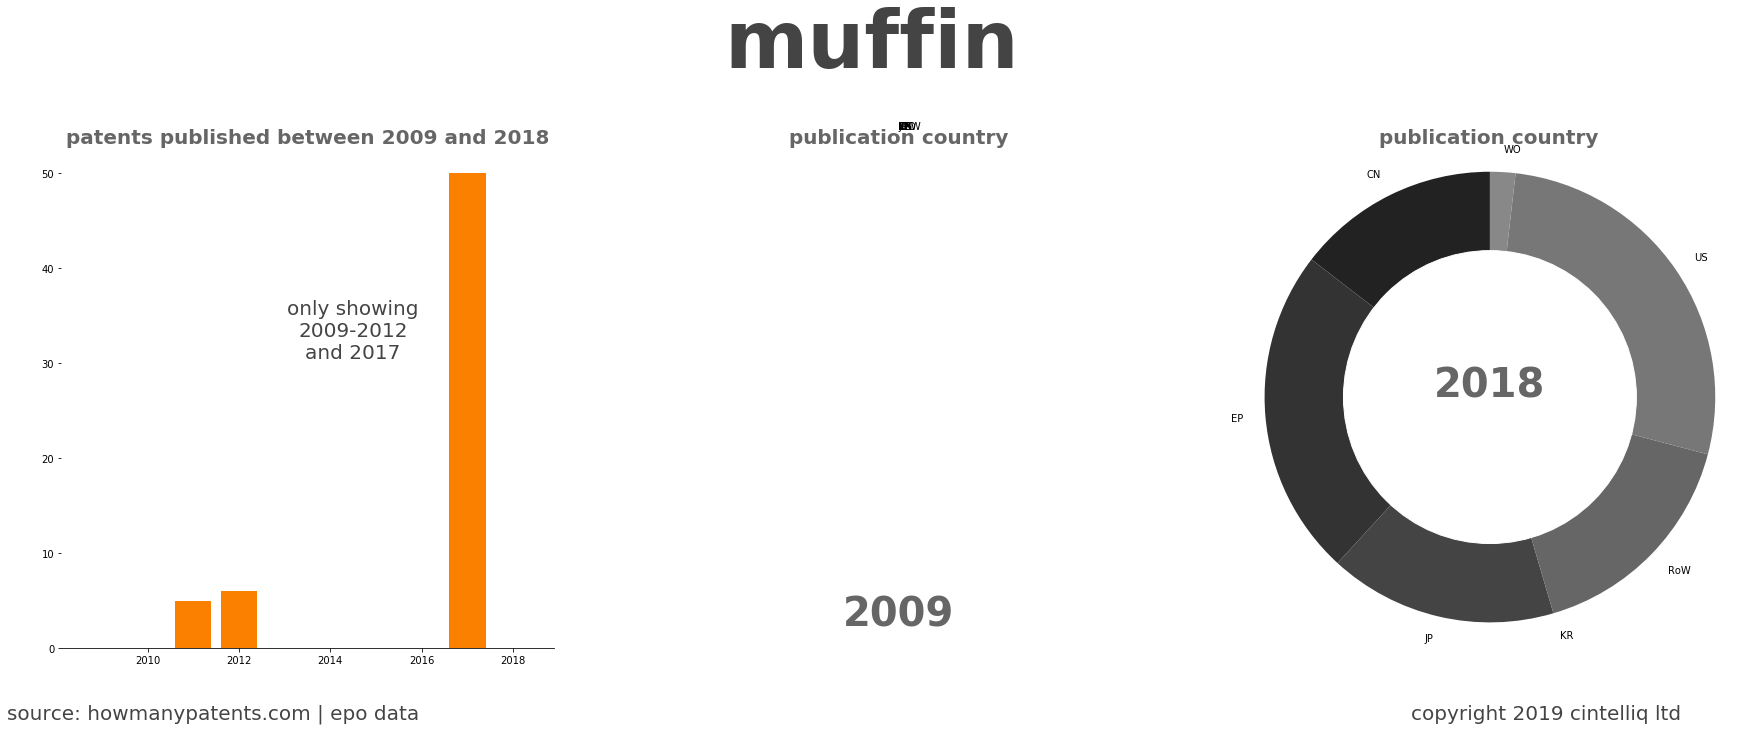 summary of patents for Muffin